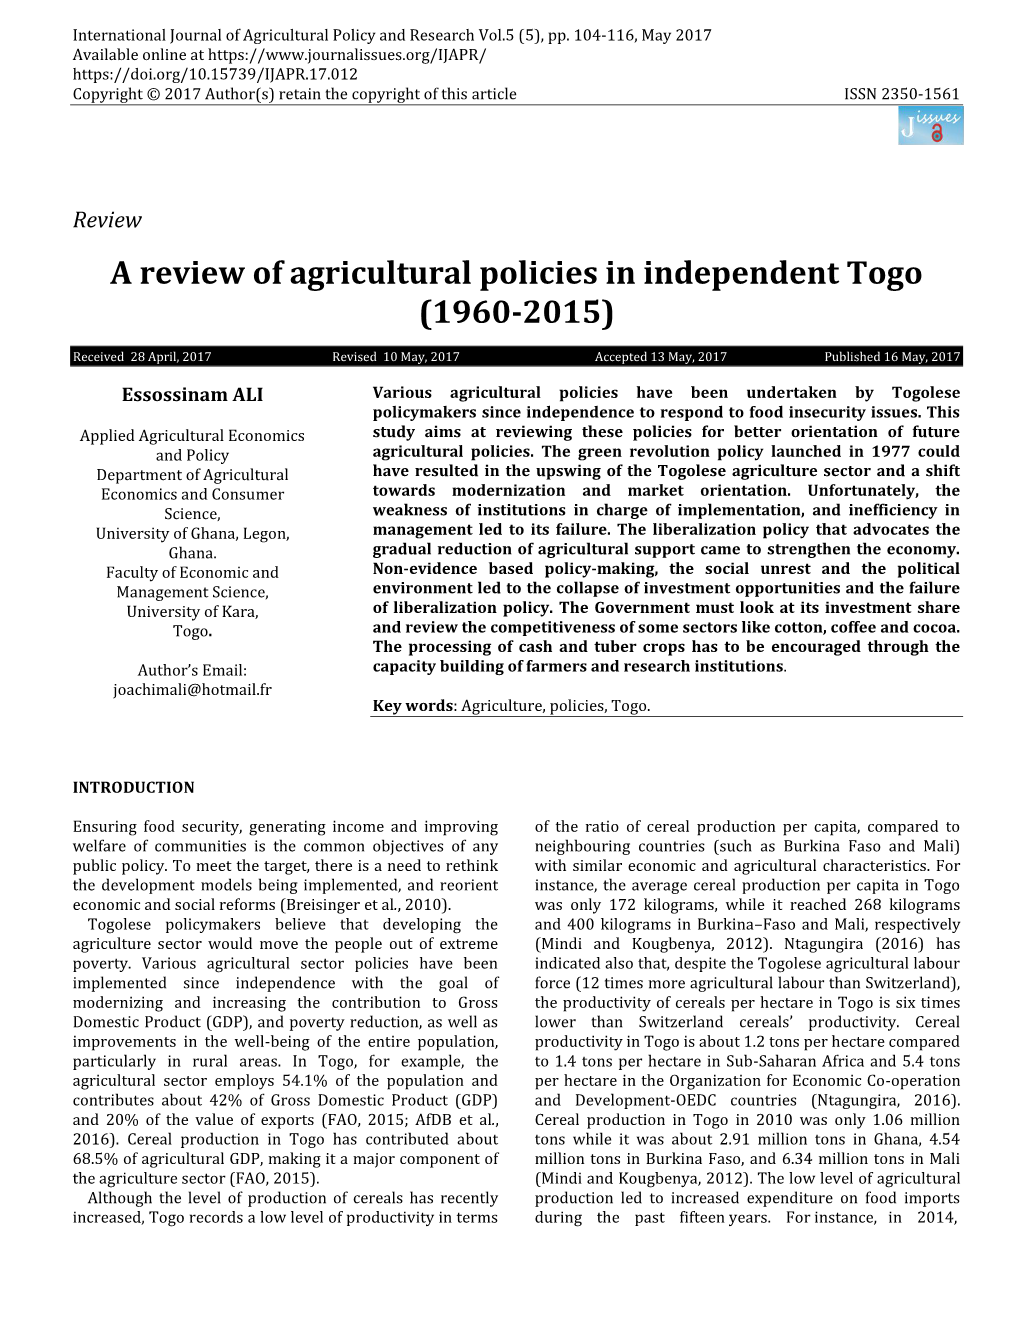 A Review of Agricultural Policies in Independent Togo (1960-2015)